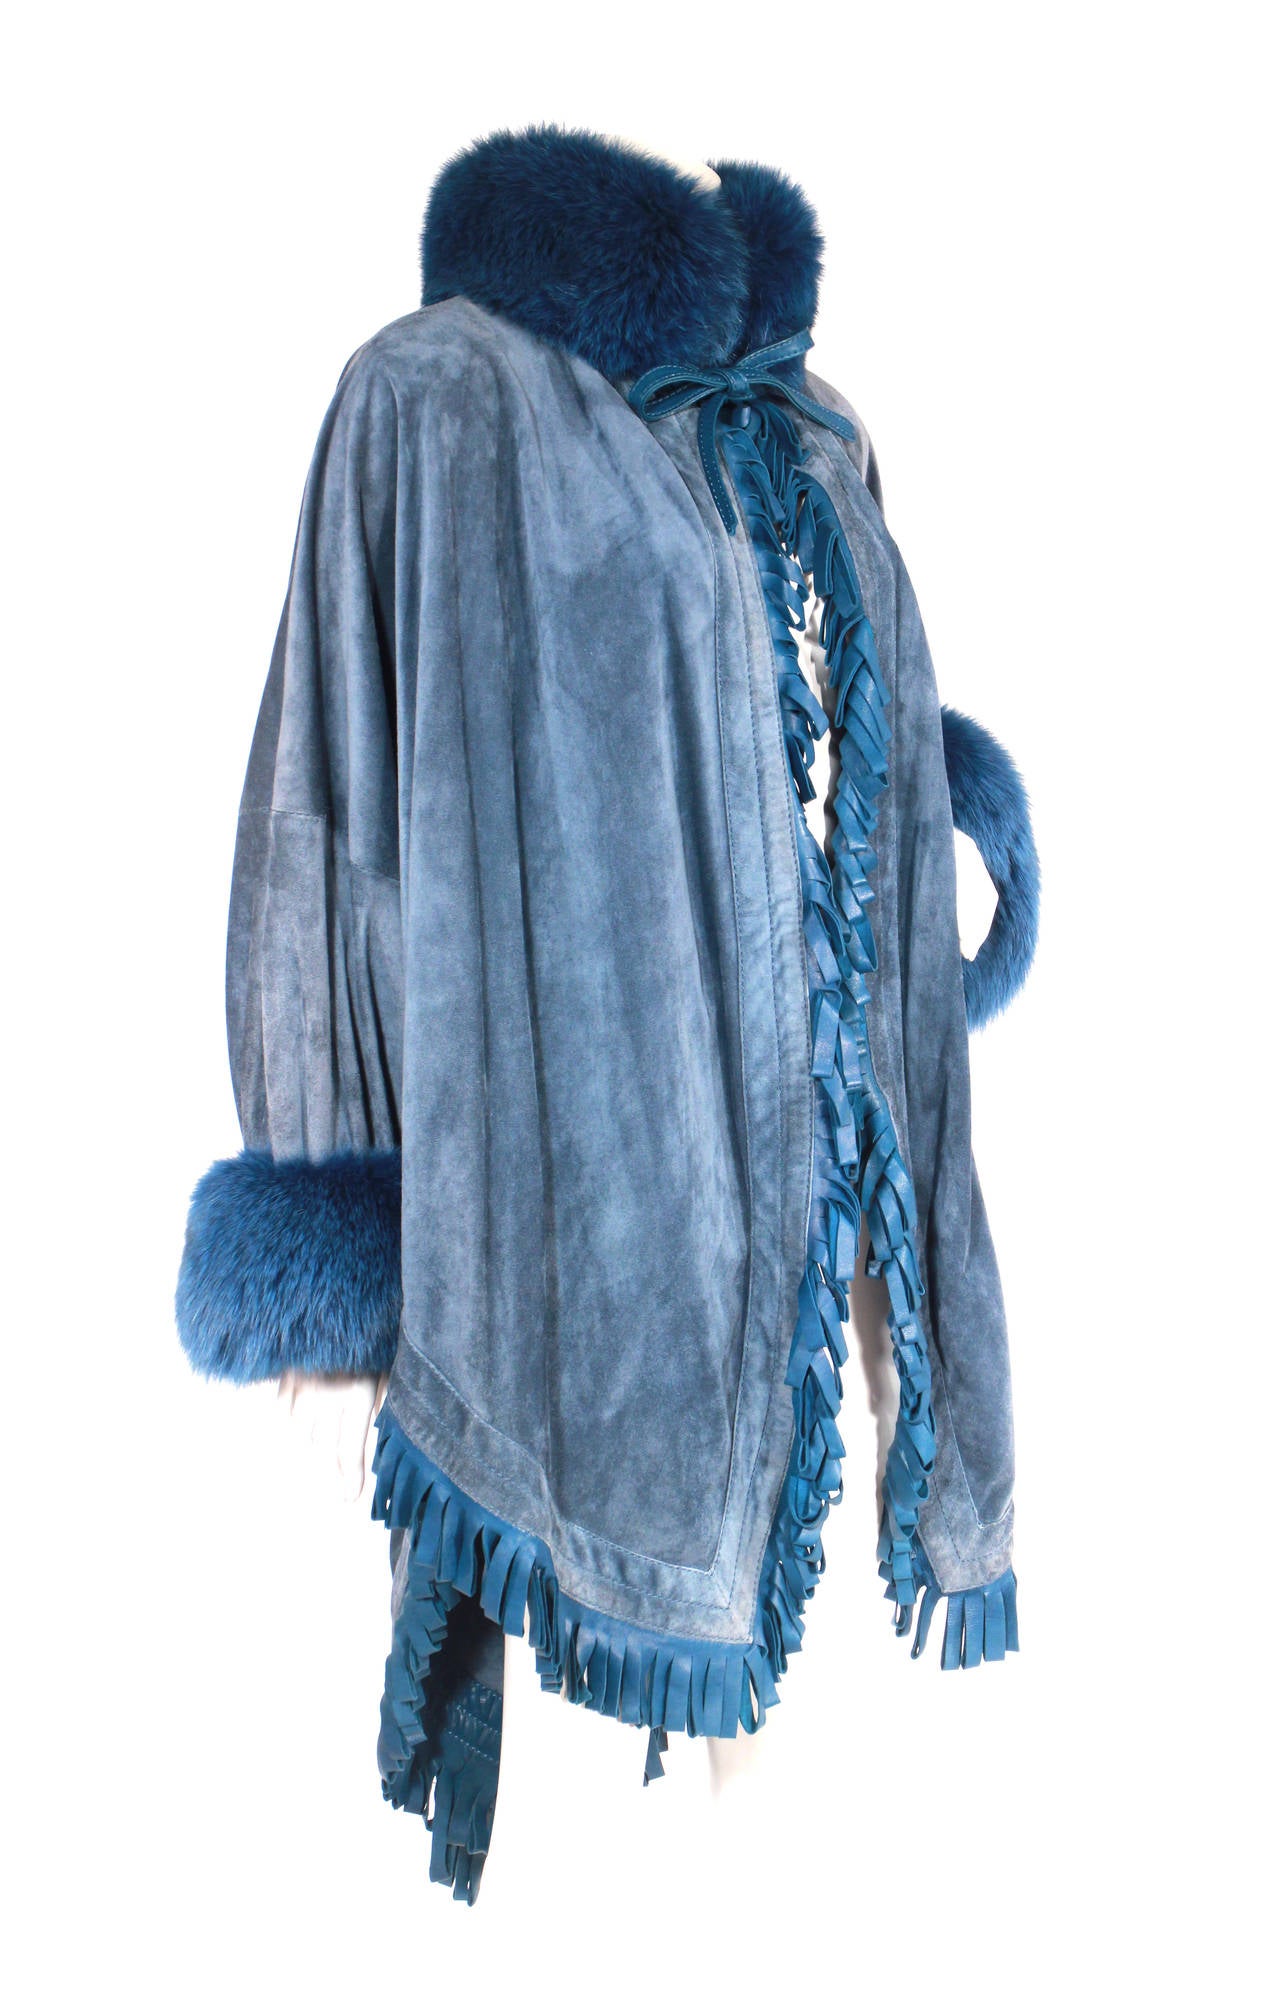 Christian Dior blue suede cape with fringed leather trim and fox fur collar and cuffs. The shape is beautiful on, gorgeous color, just an overall knock out Dior piece! Circa 1980s.

Originally owned by Regine Zylberberg, of the famed Regine night